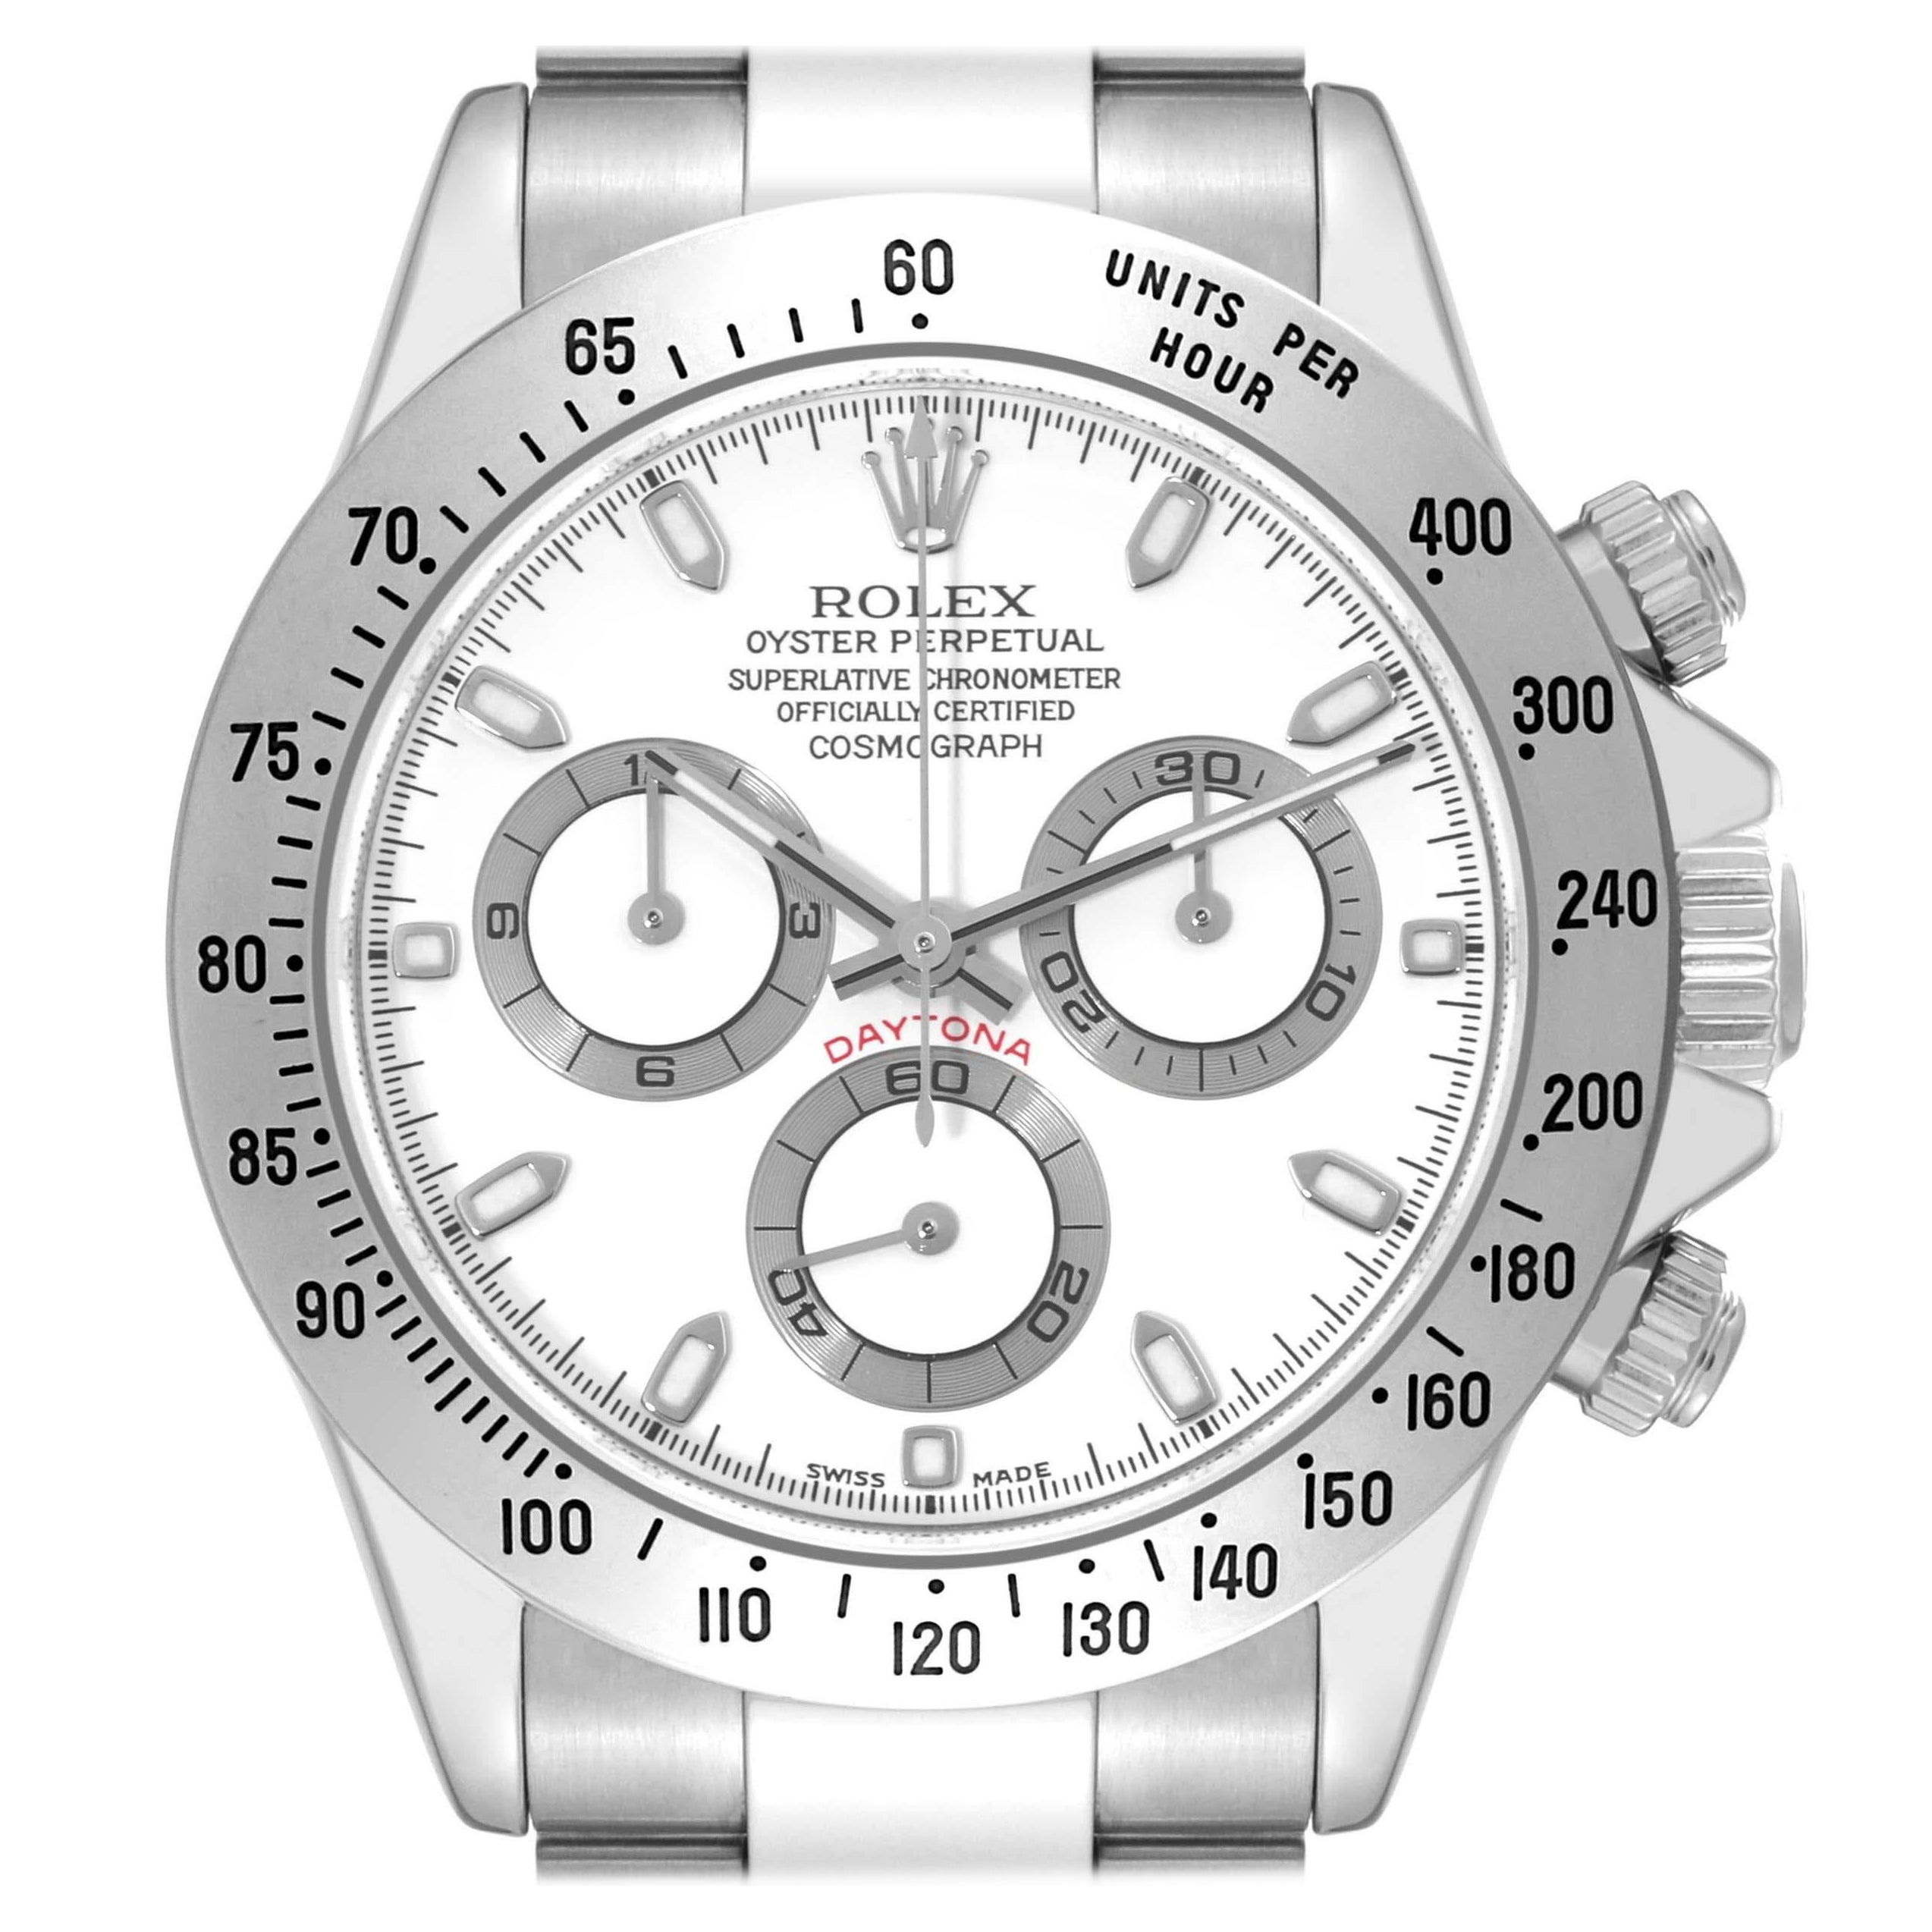 Rolex Daytona White Dial Chronograph Steel Mens Watch 116520 Box Papers